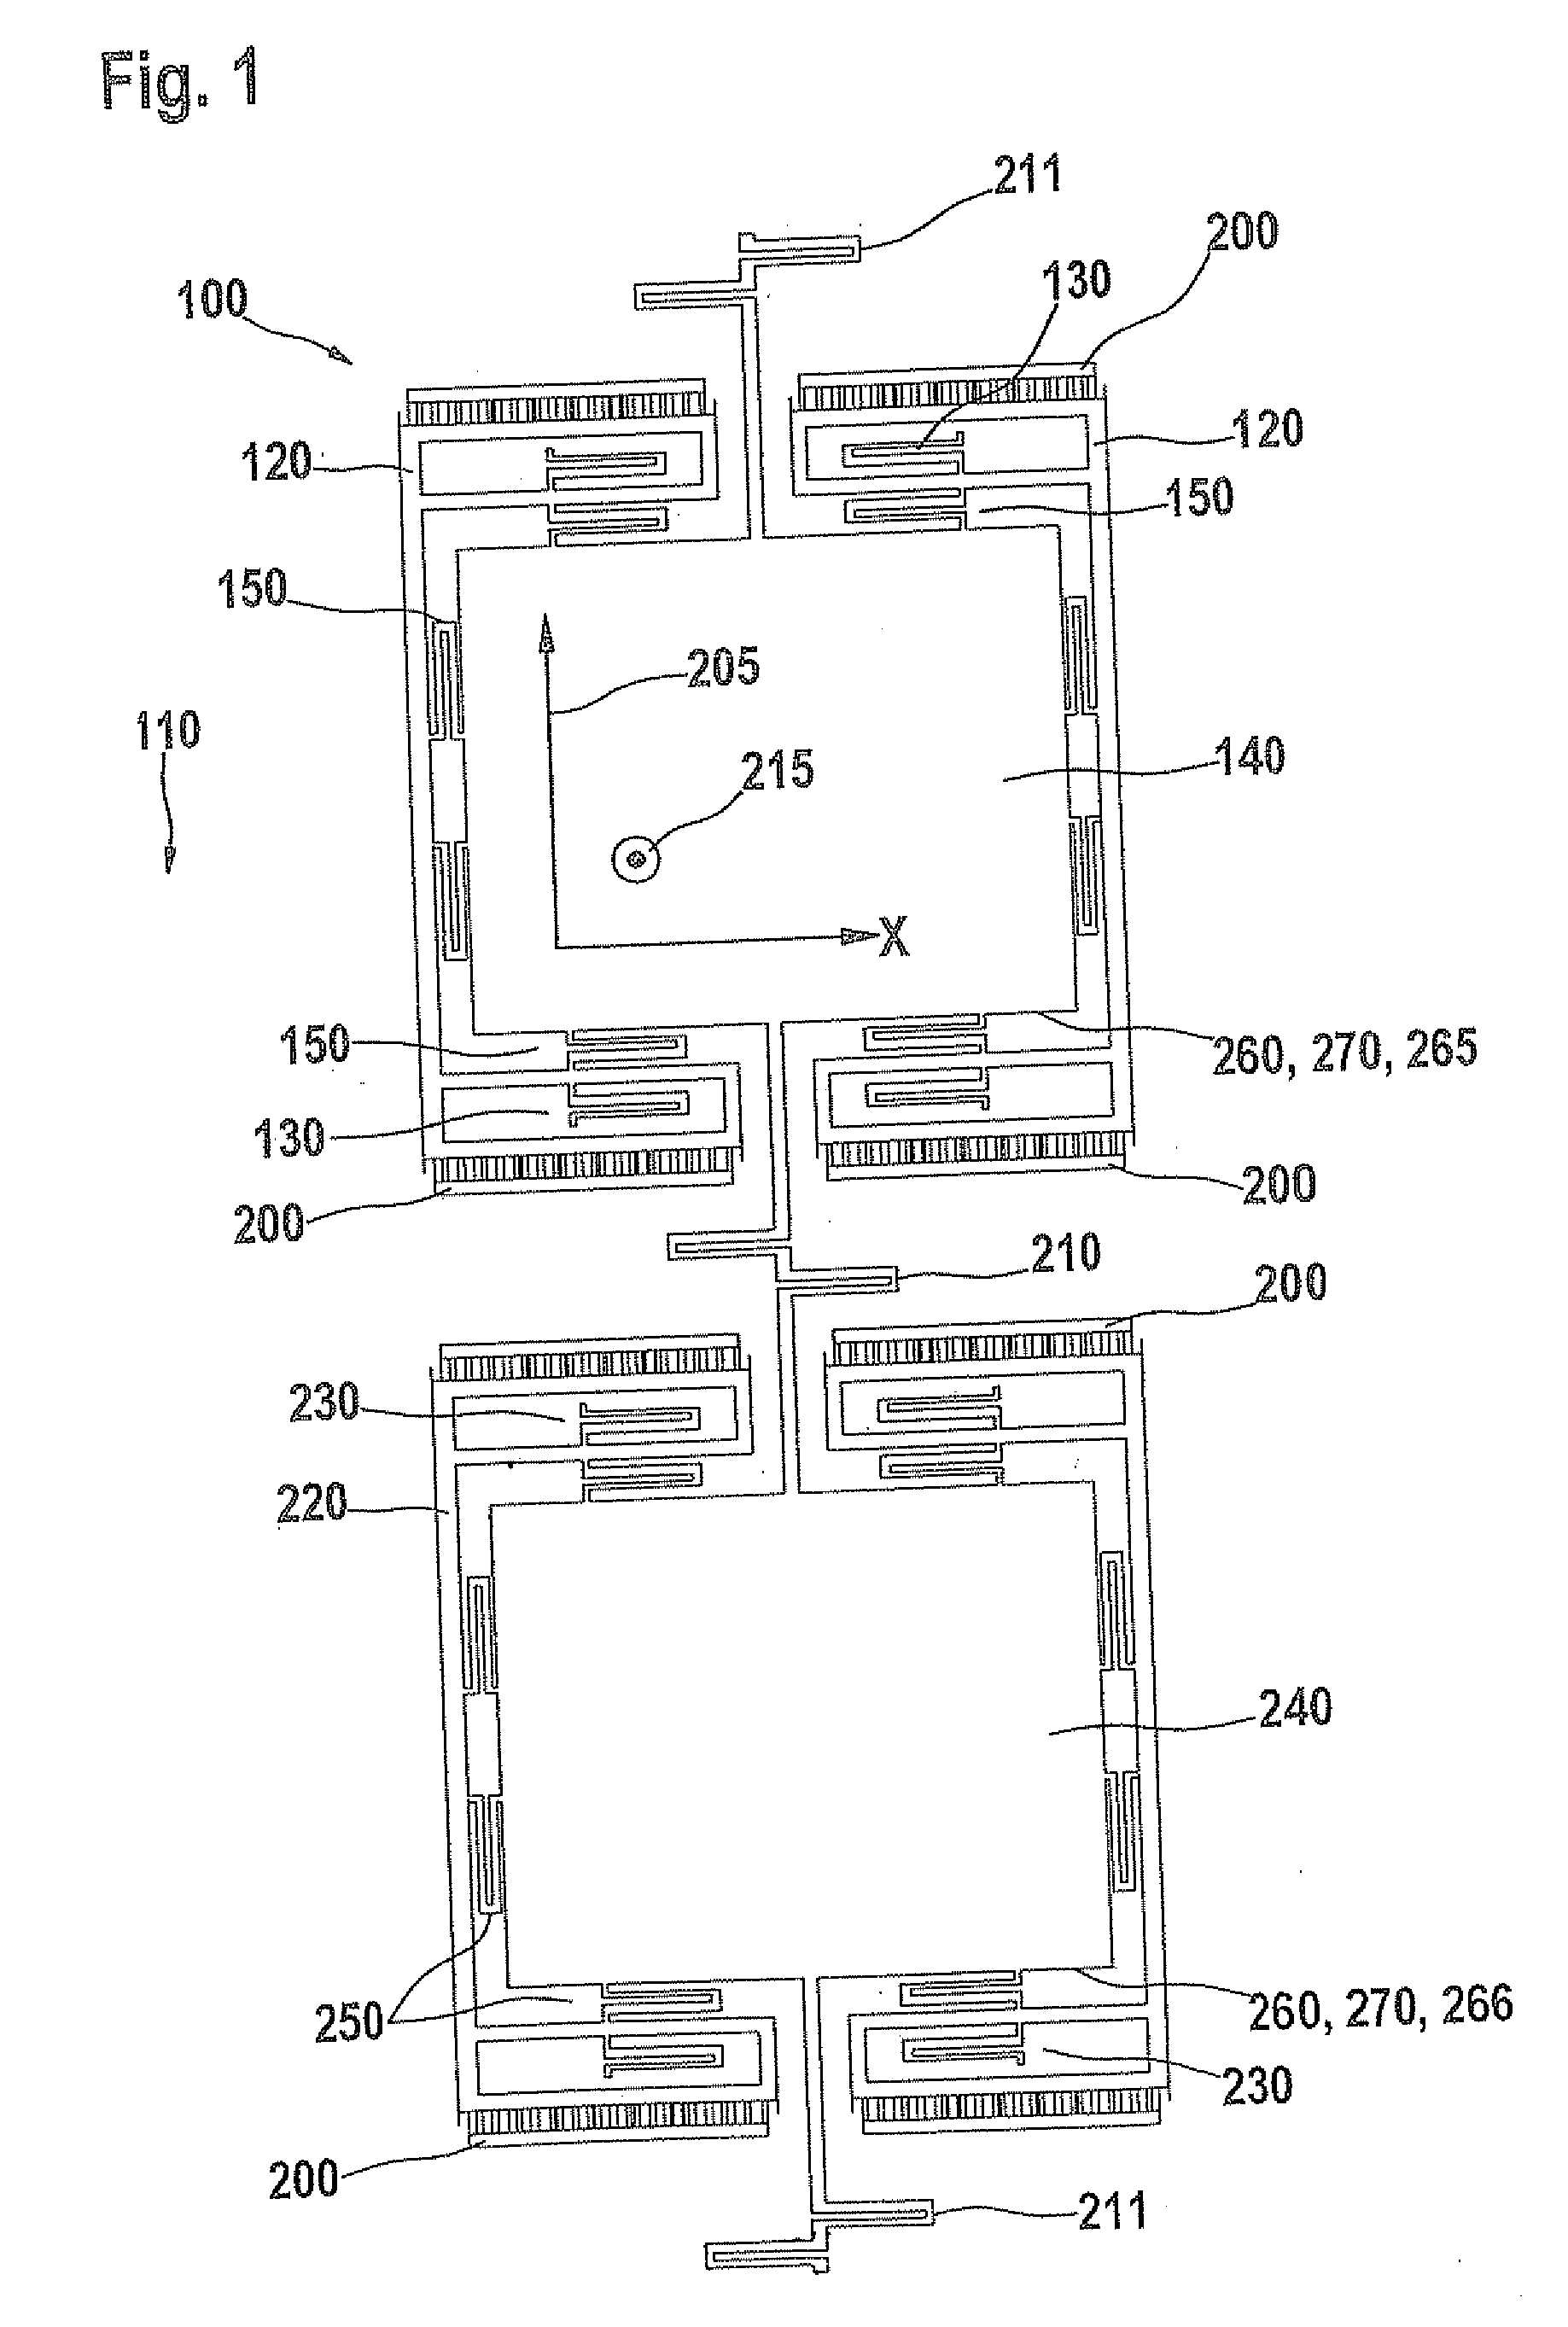 Evaluation electronics system for a rotation-rate sensor